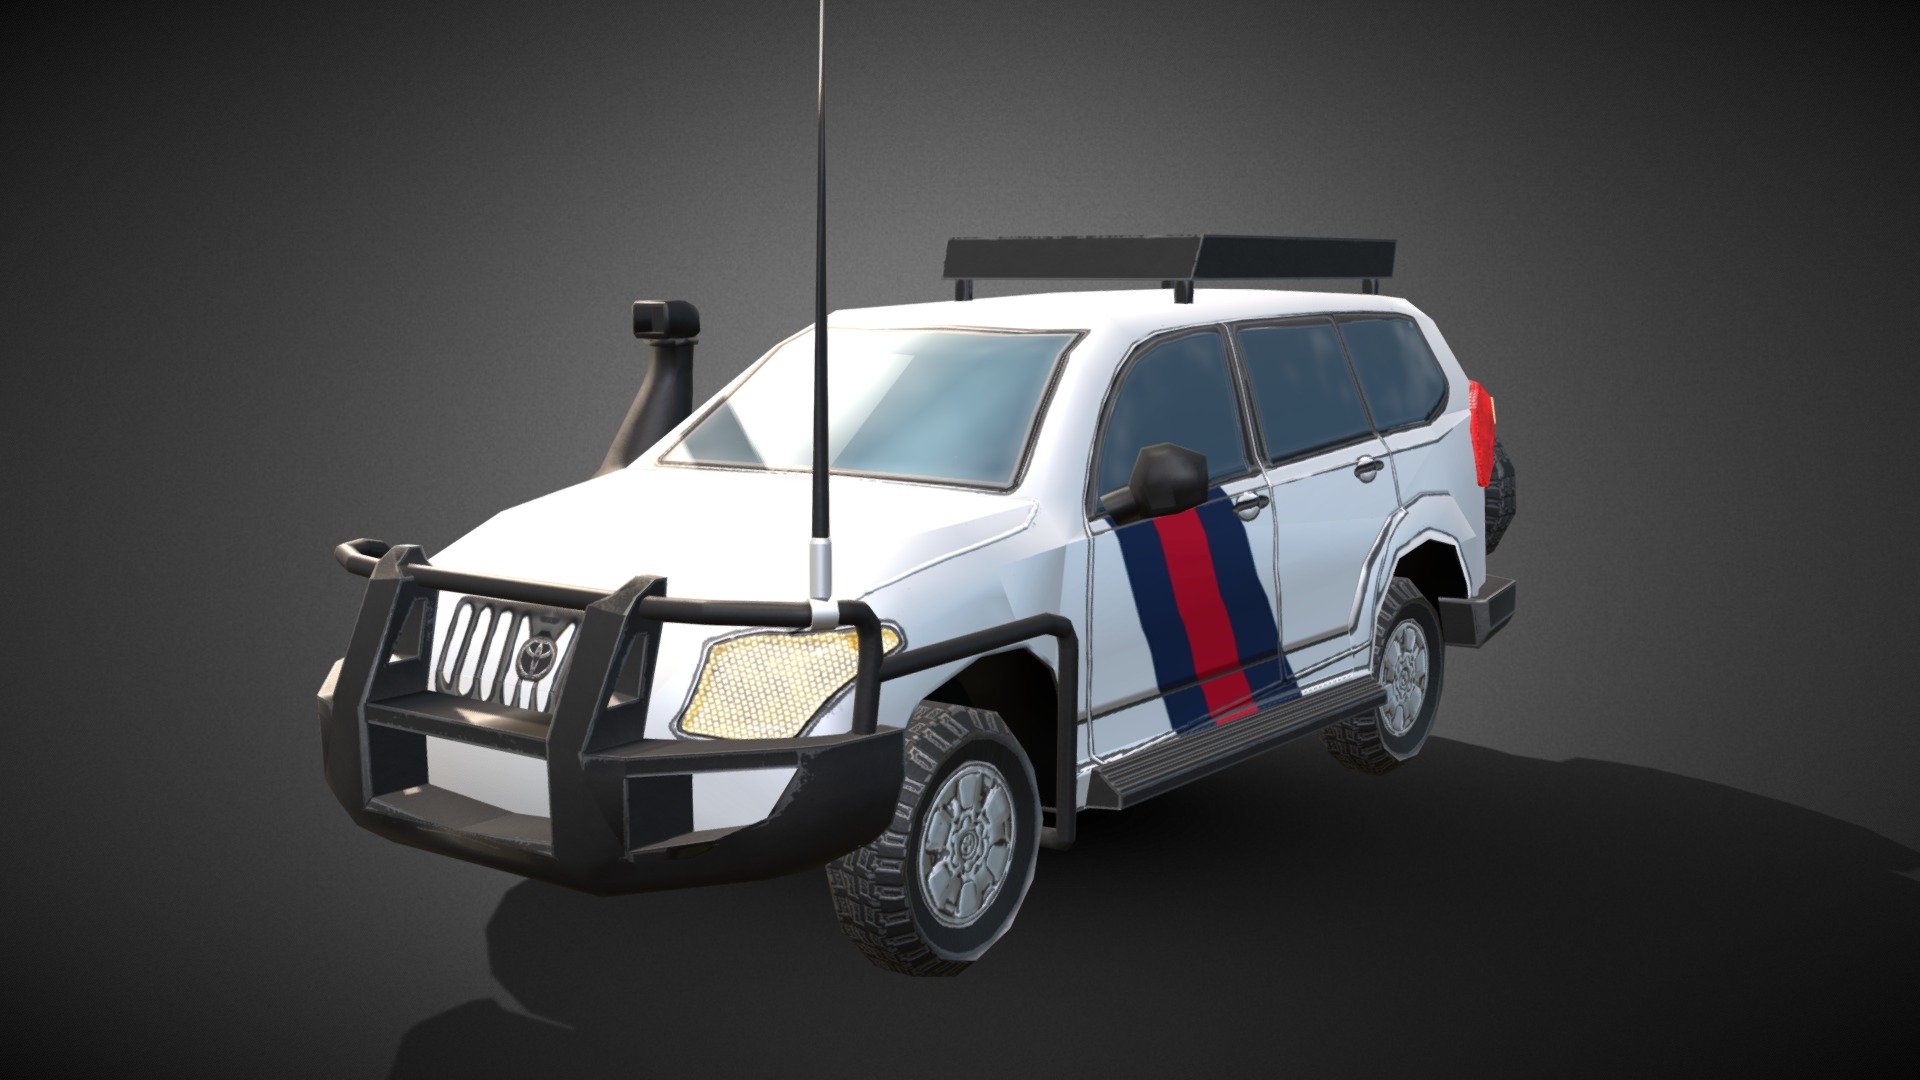 Toyota Prado a low poly vehicle ready for an engine like Unity or Unreal ideal for a RTS, Isometric or a War Video Game it has 1629 verts 2946 tris and 3169 edges and the texture is 2048 x 2048 and includes Diffuse, Metal, Normal and Emissive Map the format is .PNG and the model is available as OBJ, MB and FBX all the pieces are named If you need 3D Game Assets or STL Files I can do commission works 3d model